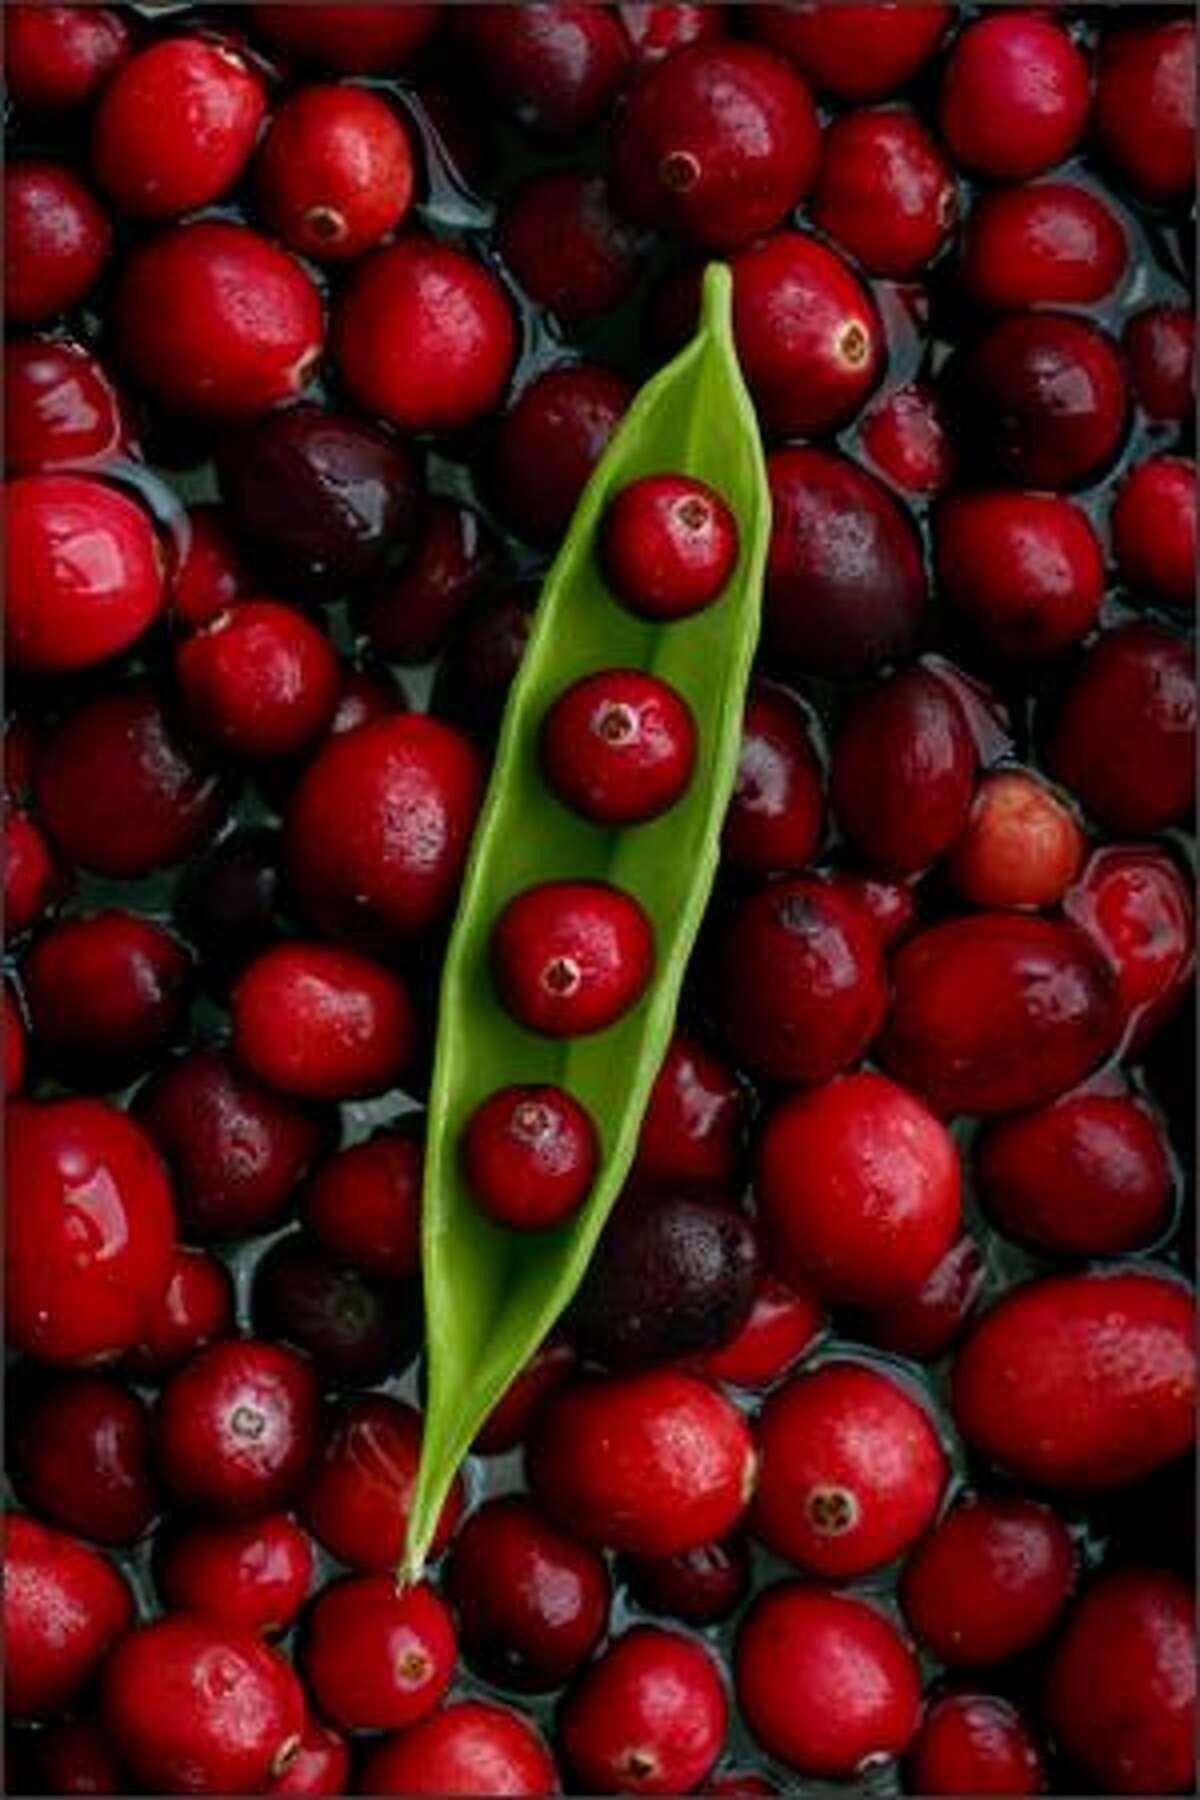 Cranberries can form the basis of cocktails, sauces or the essence of a sorbet.Rogers: I wanted to take a simple food portrait and add an unexpected twist. The pea pod idea occurred to me after I spied the peas while stocking up on cranberries for the shoot. My "bog" background was created by filling a bowl of water with berries. Initially, I shot the pod on a bed of golden leaves to give the photo a feeling of fall. My editors helped me out by suggesting that it just didn't scream cranberries ... pushing me to go back to the drawing board and create a picture that more effectively conveyed the cranberry message while retaining the whimsy.